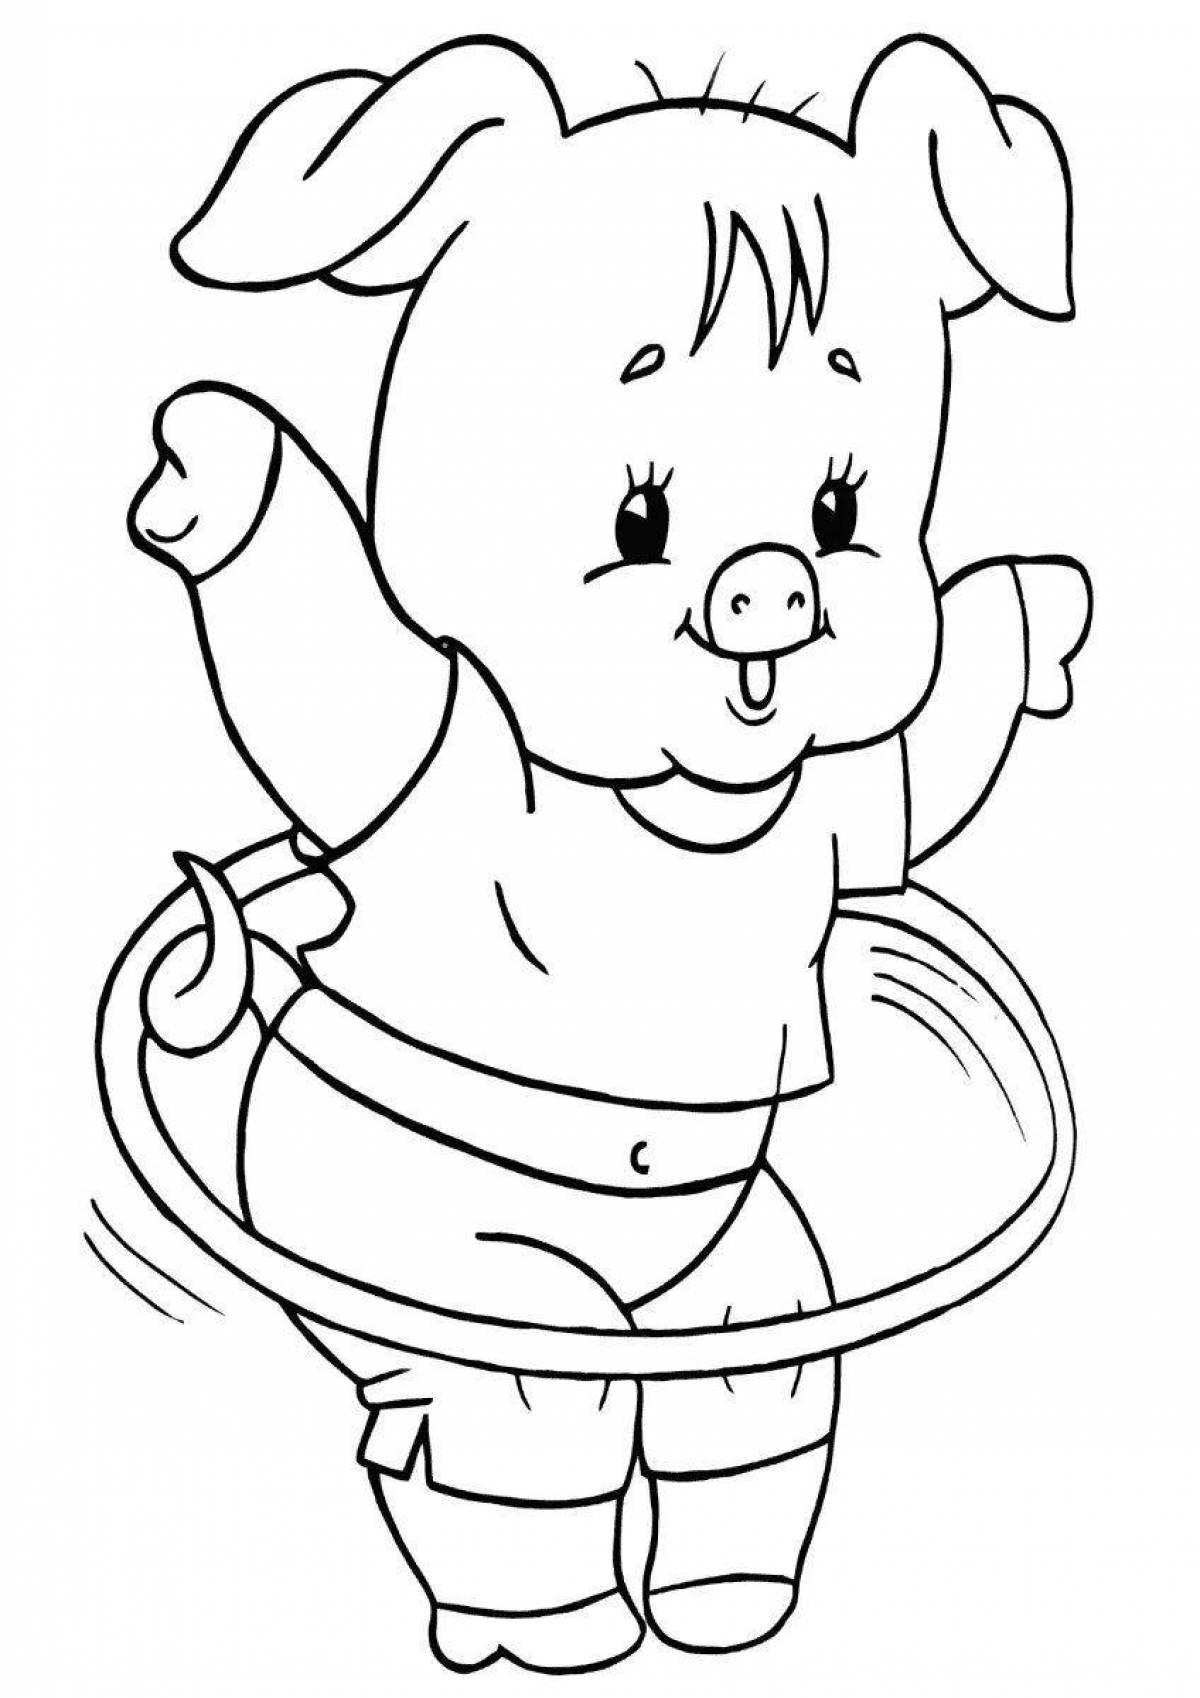 Colorful hoop coloring page